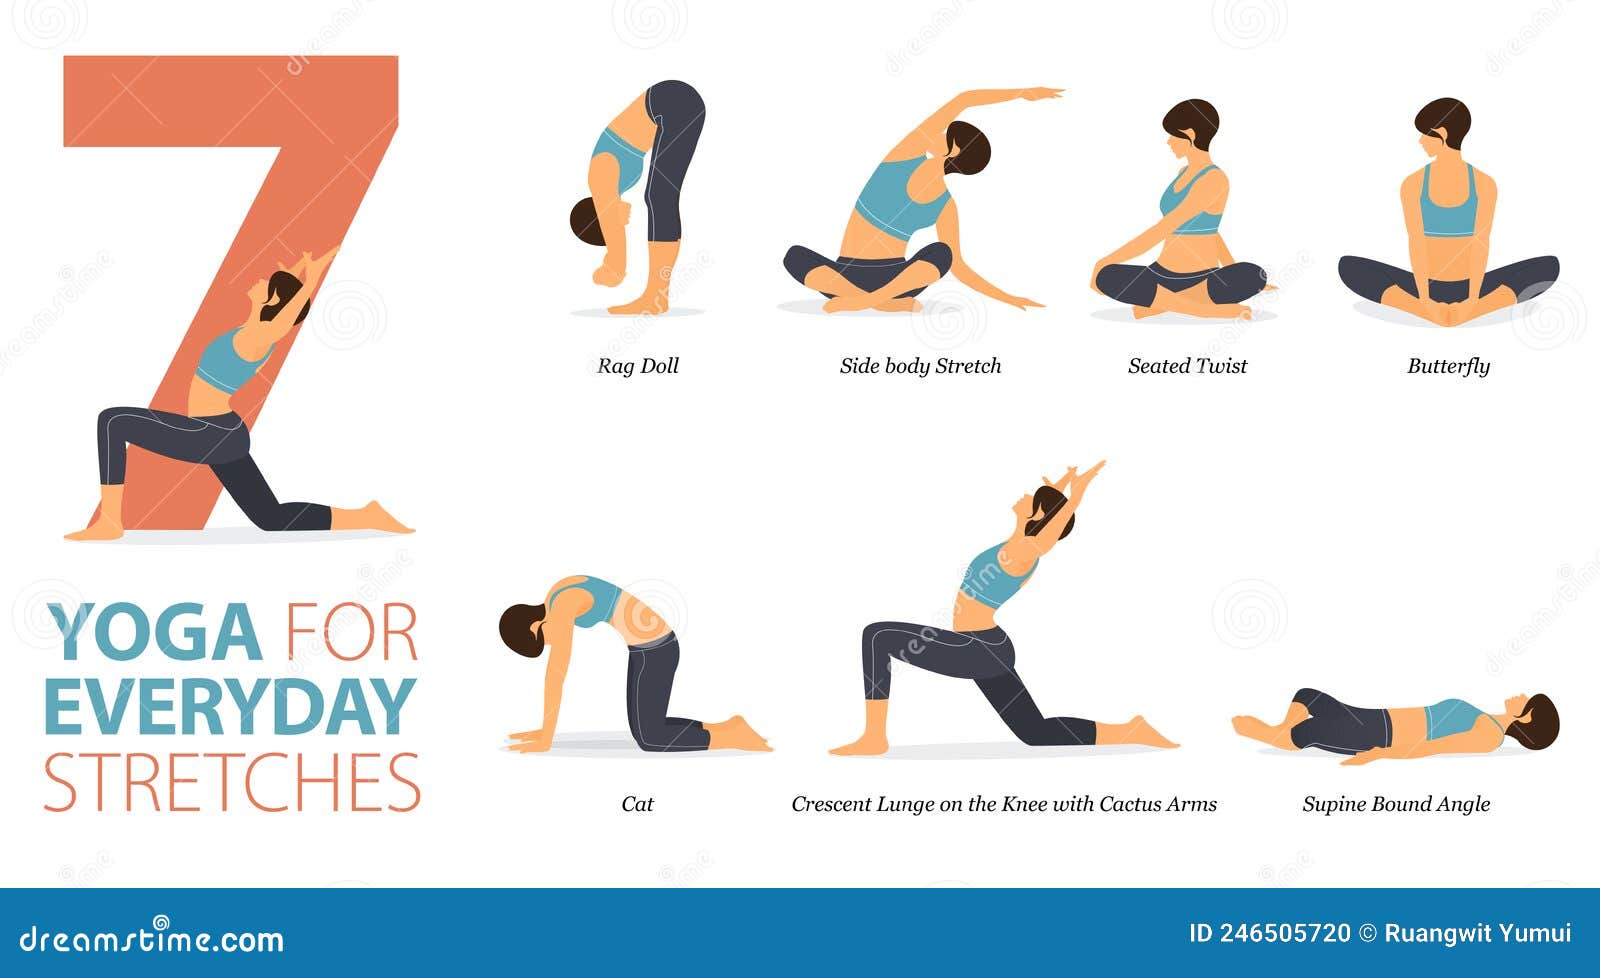 7 Yoga Poses for Legs and Thighs - DoYou